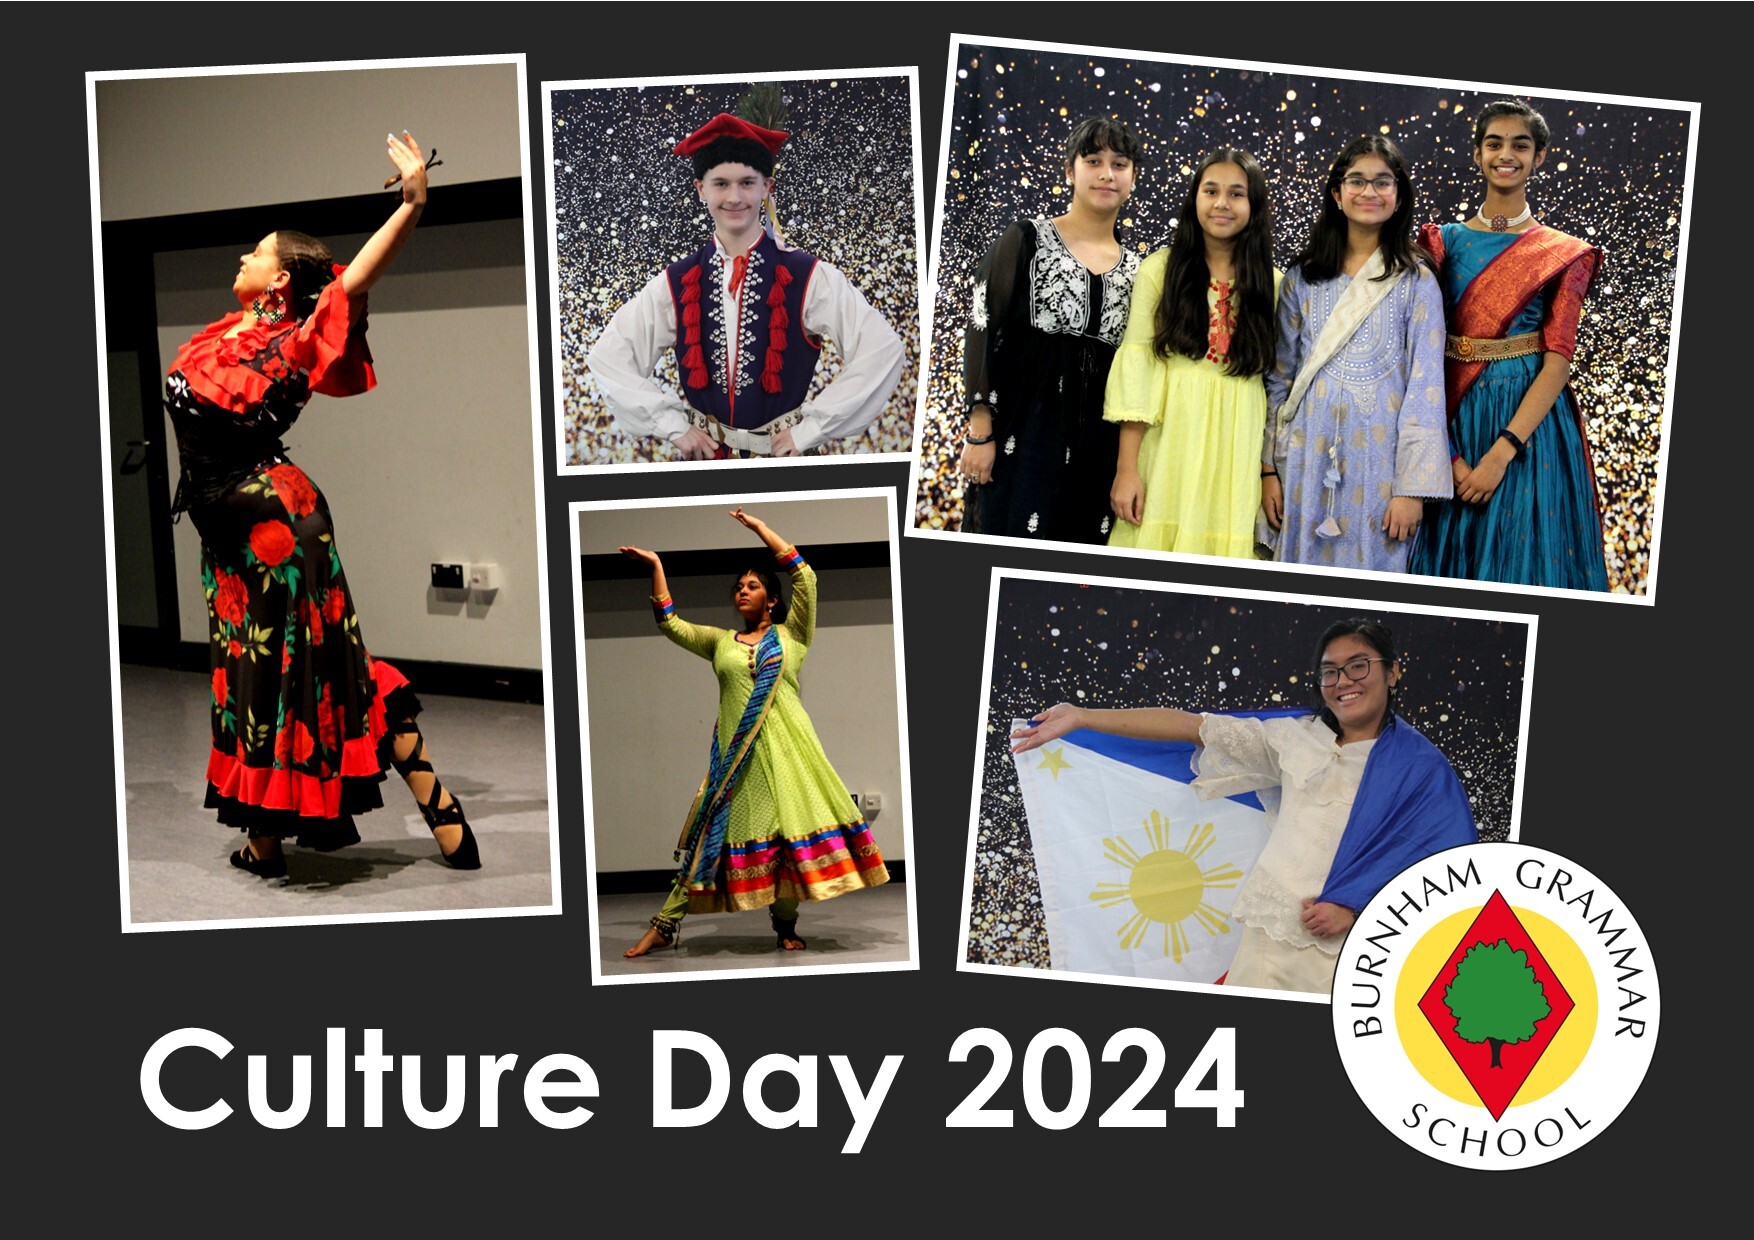 Bgs culture day 2024 website image